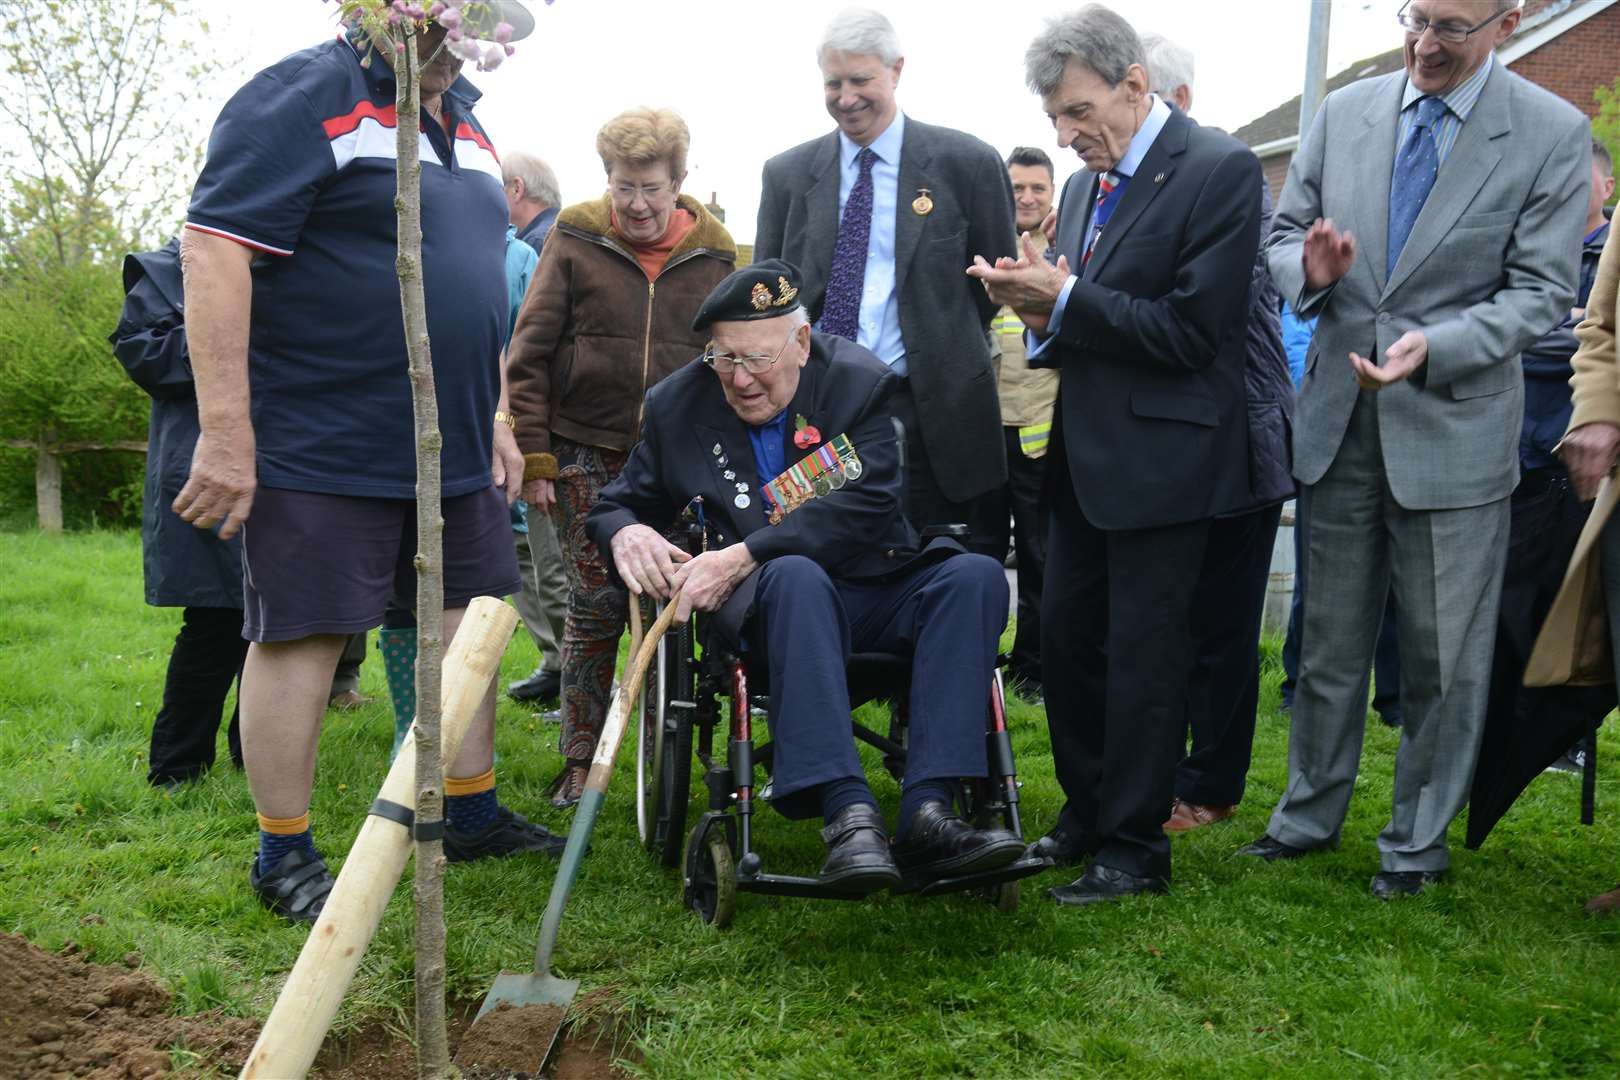 Cllr Richard Parry watches as Harry Garrett shovels earth at the base of his tree.